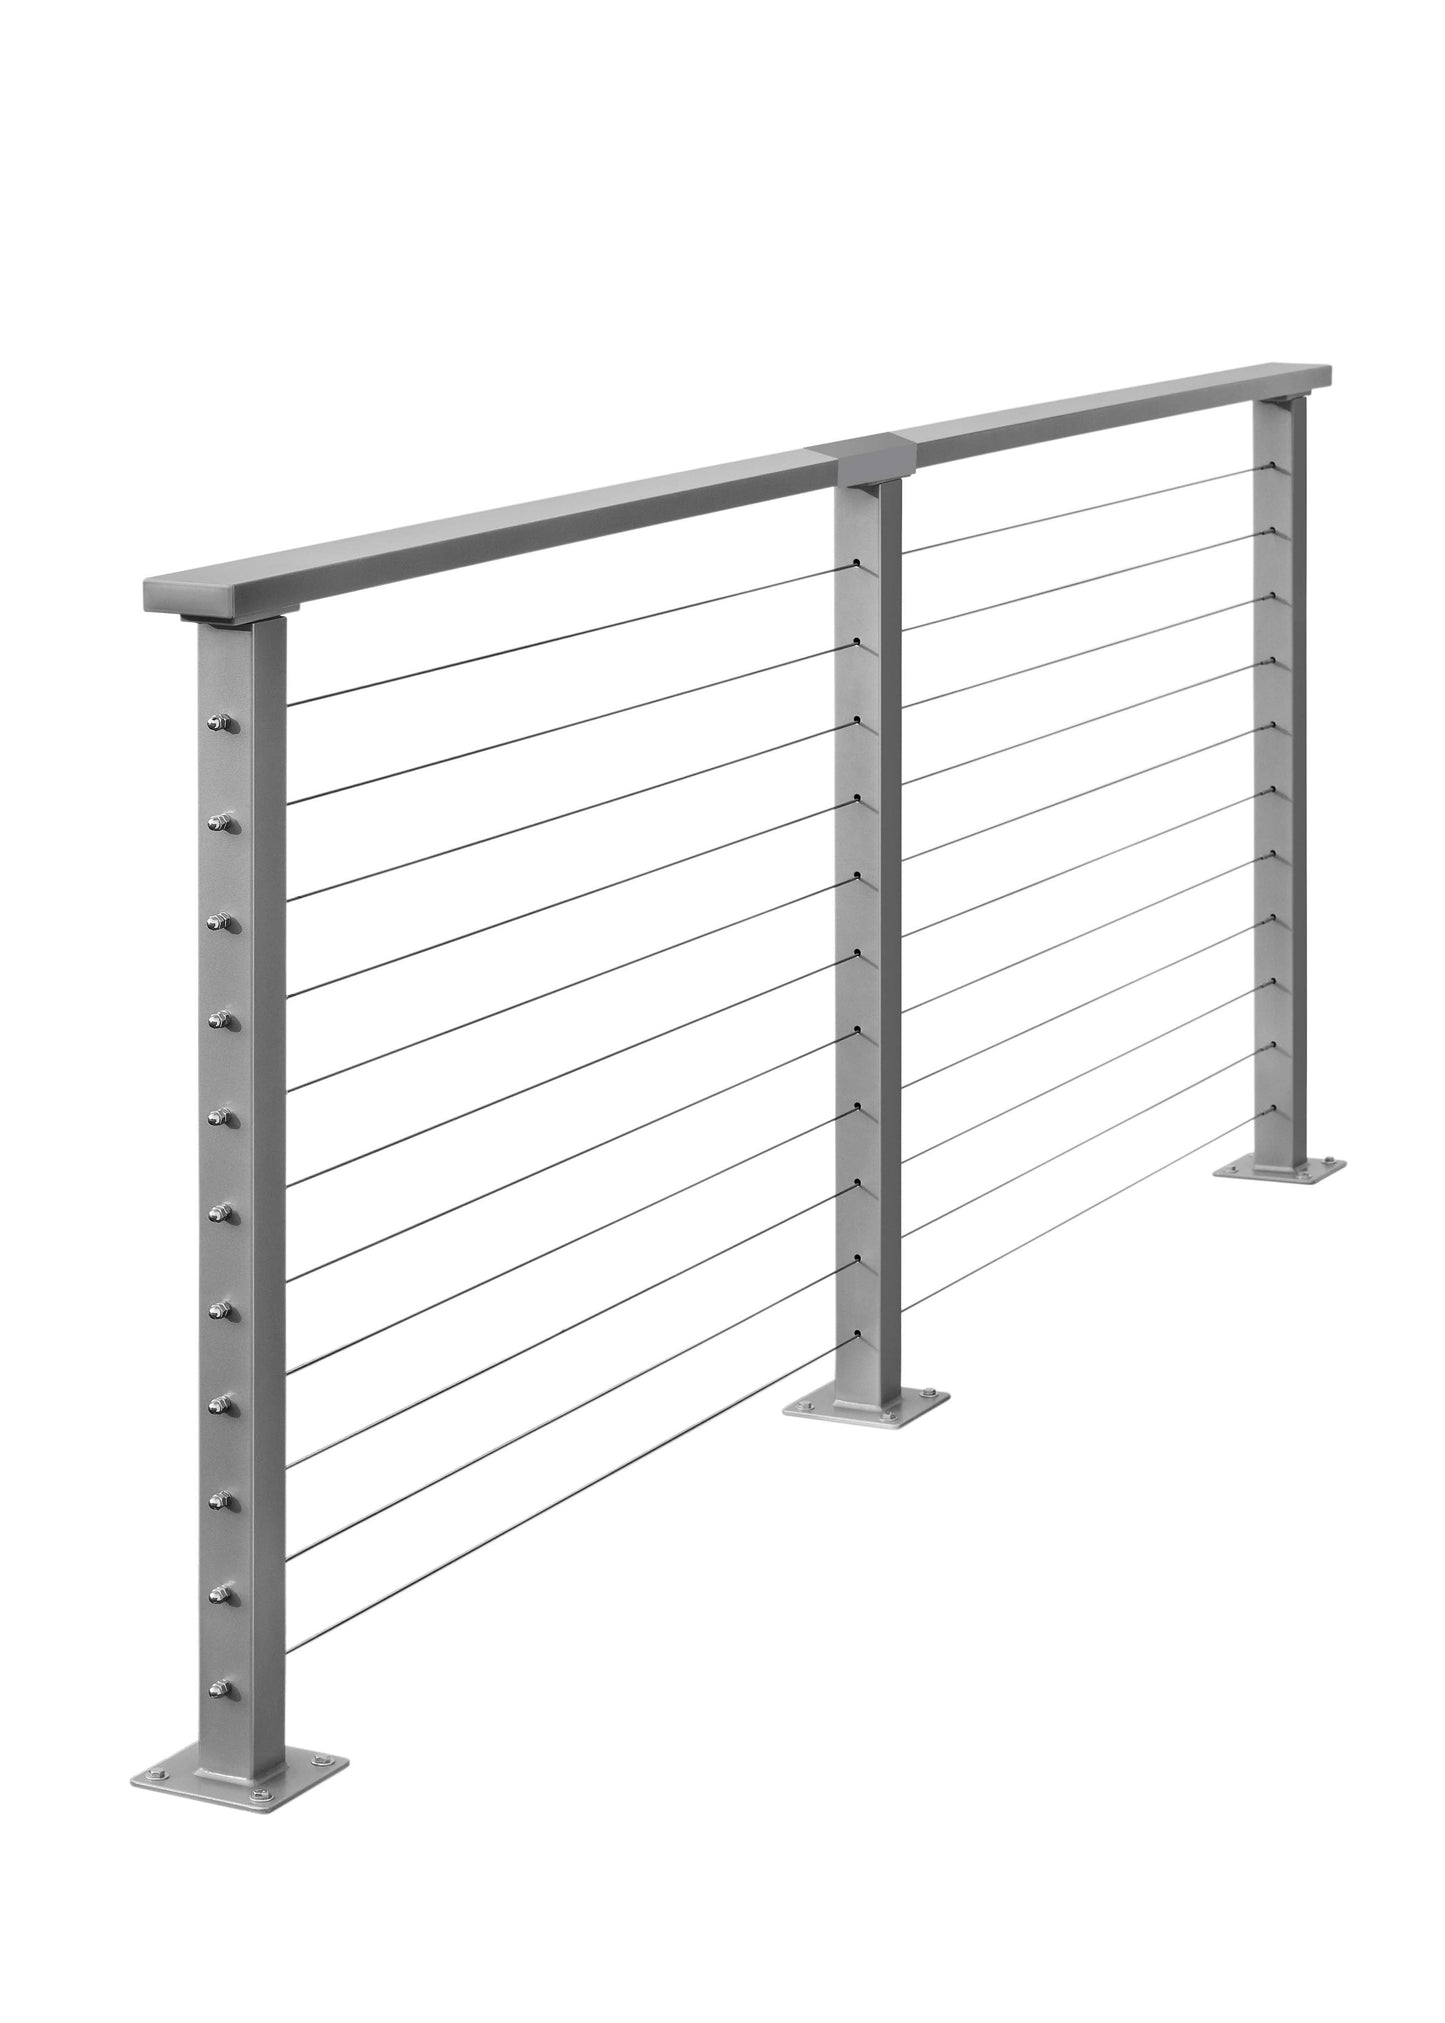 7 ft. Deck Cable Railing, 36 in. Base Mount, Grey